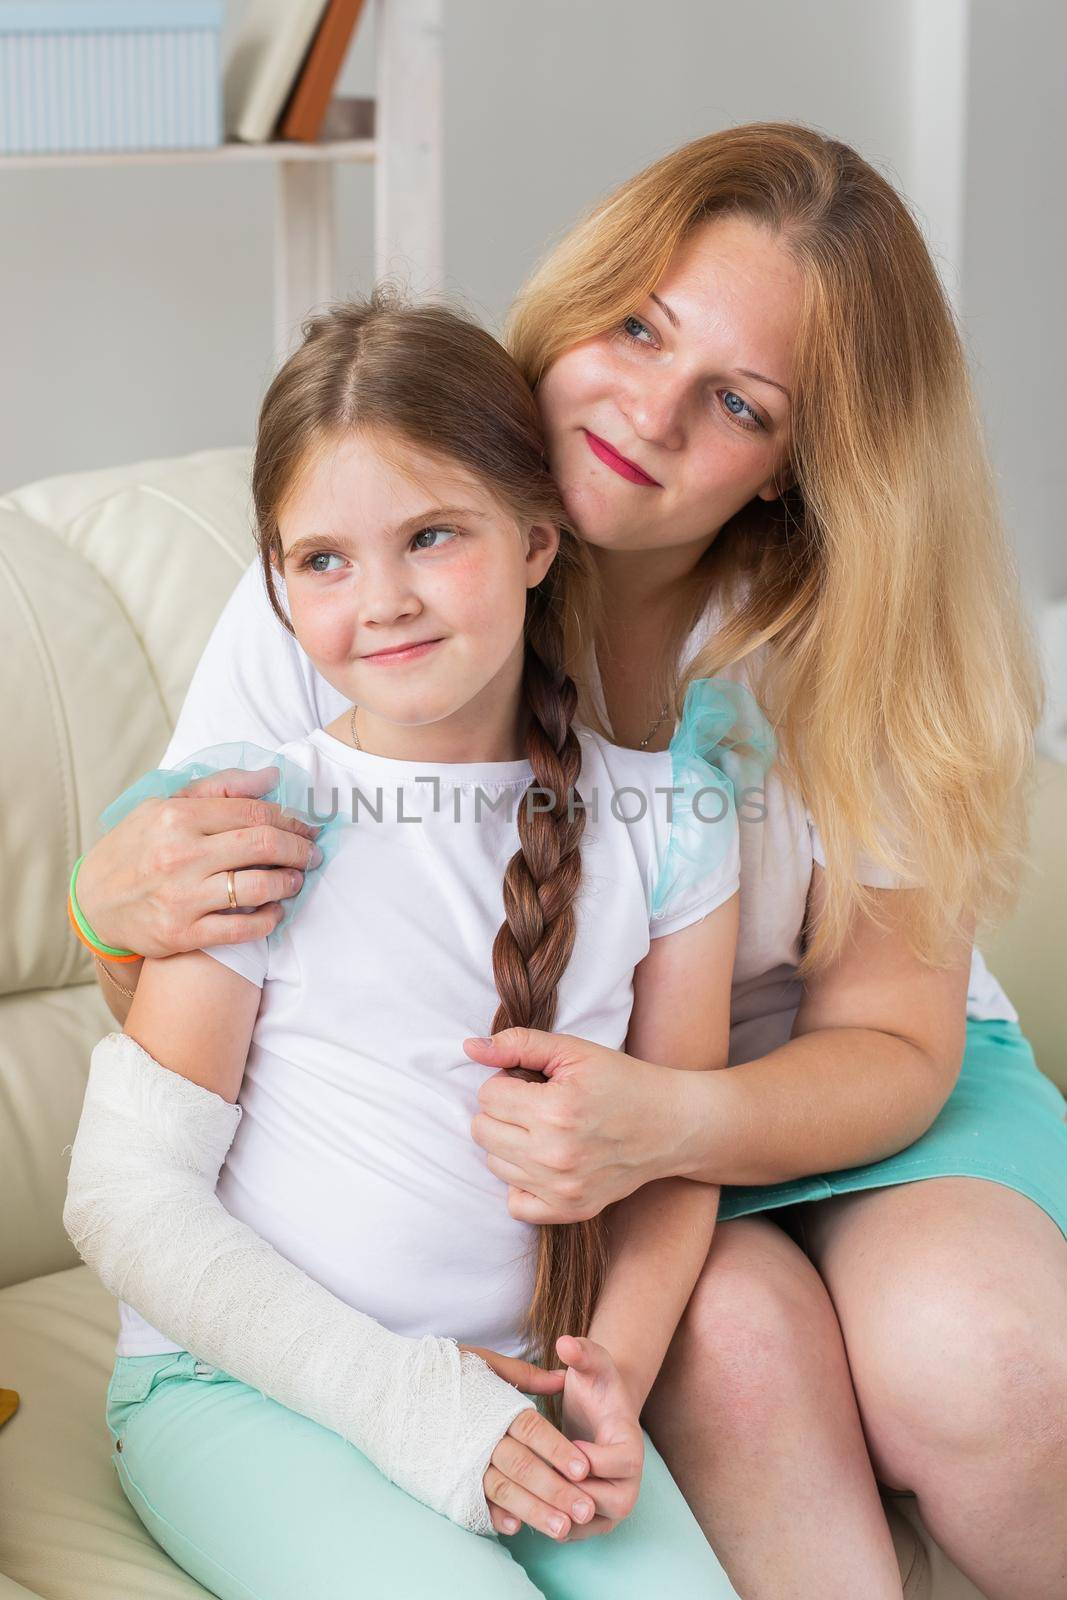 Mother hugs your child girl with a cast on a broken wrist or arm smiling. Childhood illnesses, a positive outlook and recovery. by Satura86